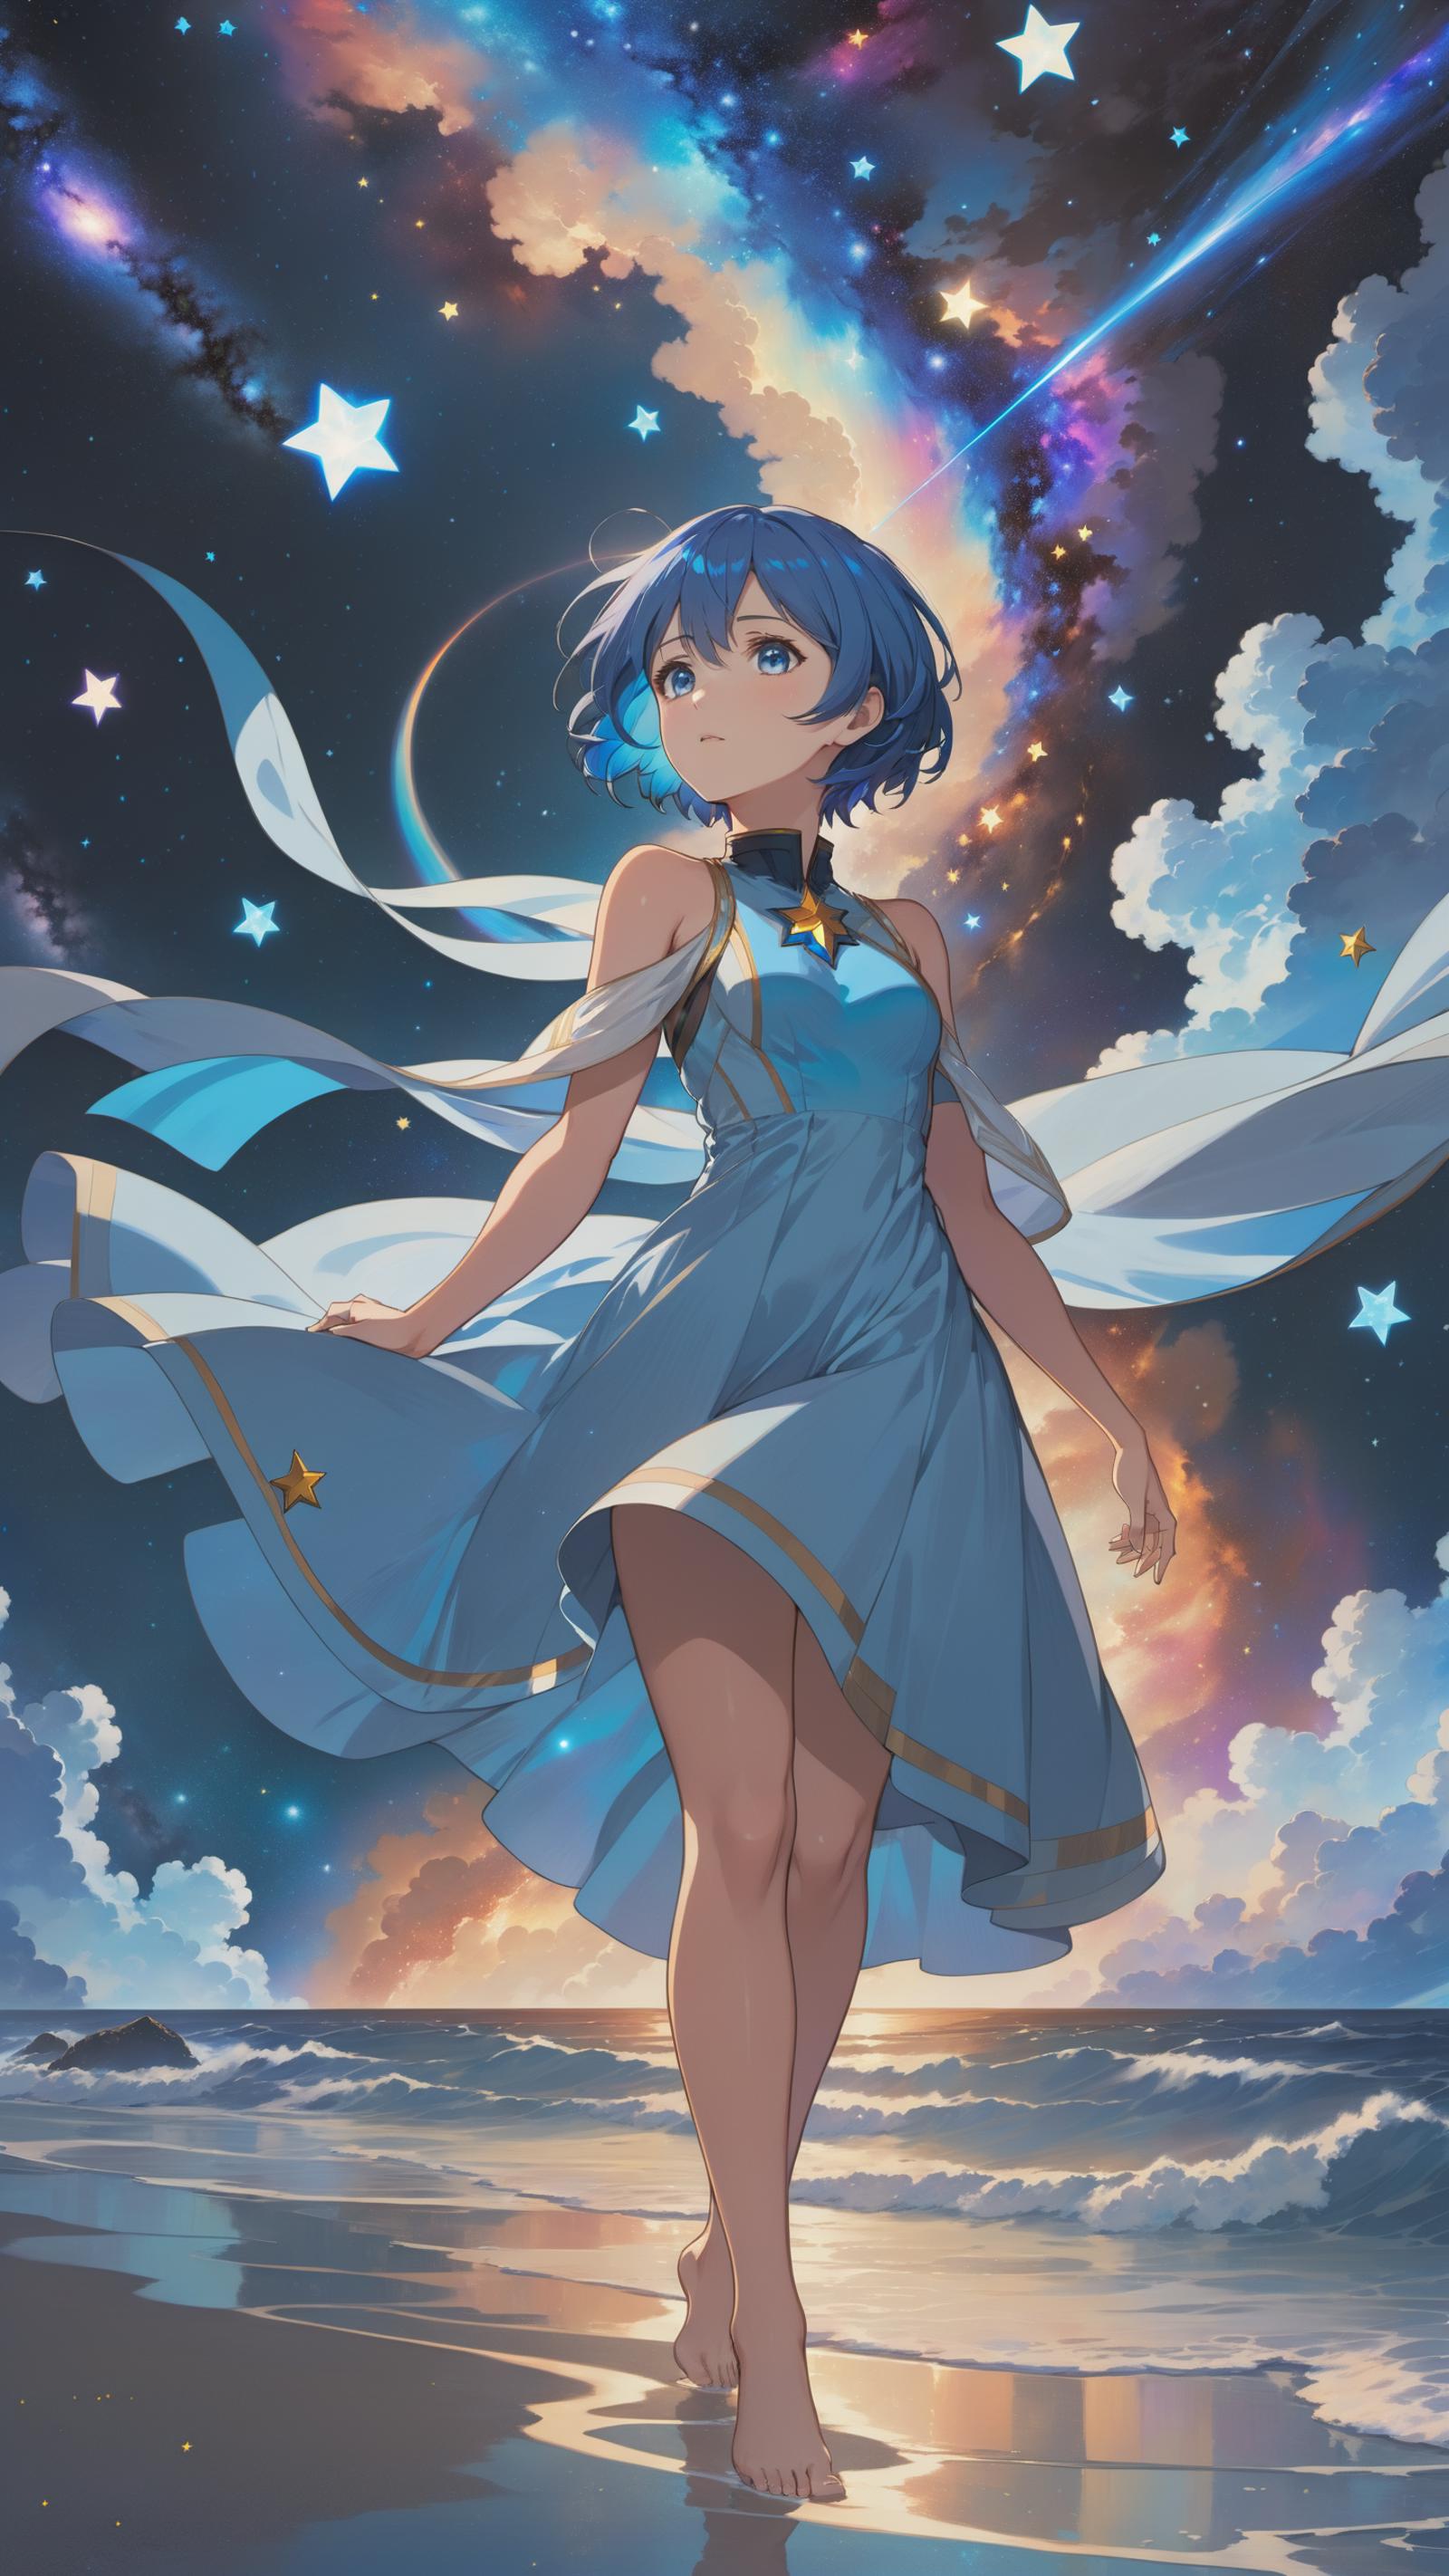 A young girl in a blue dress stands in a starry sky.